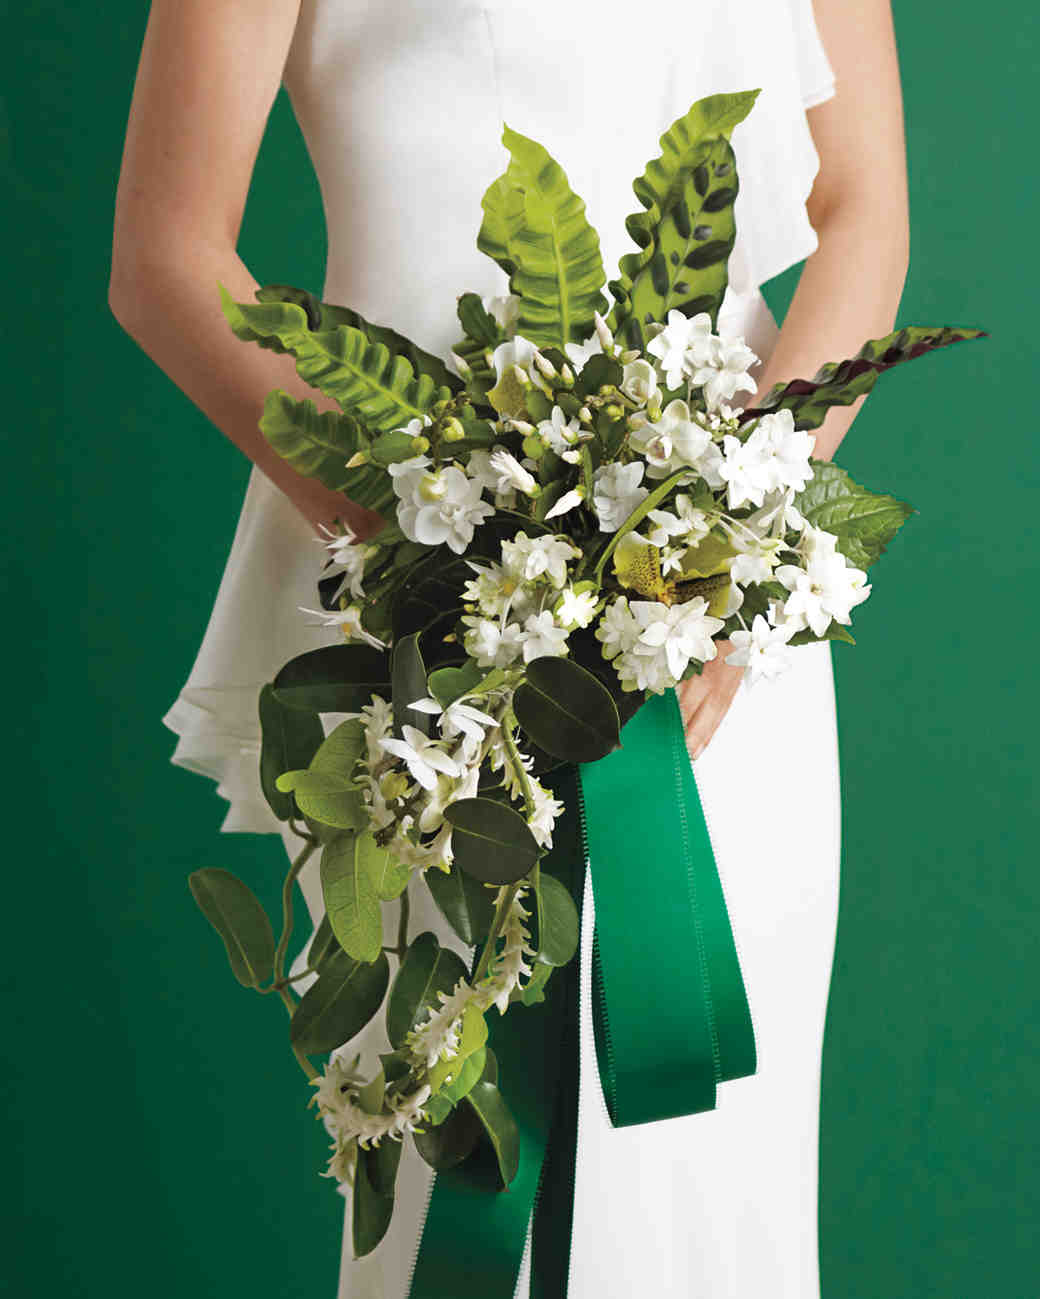 Green Wedding Ideas for Shades From Emerald to Jade